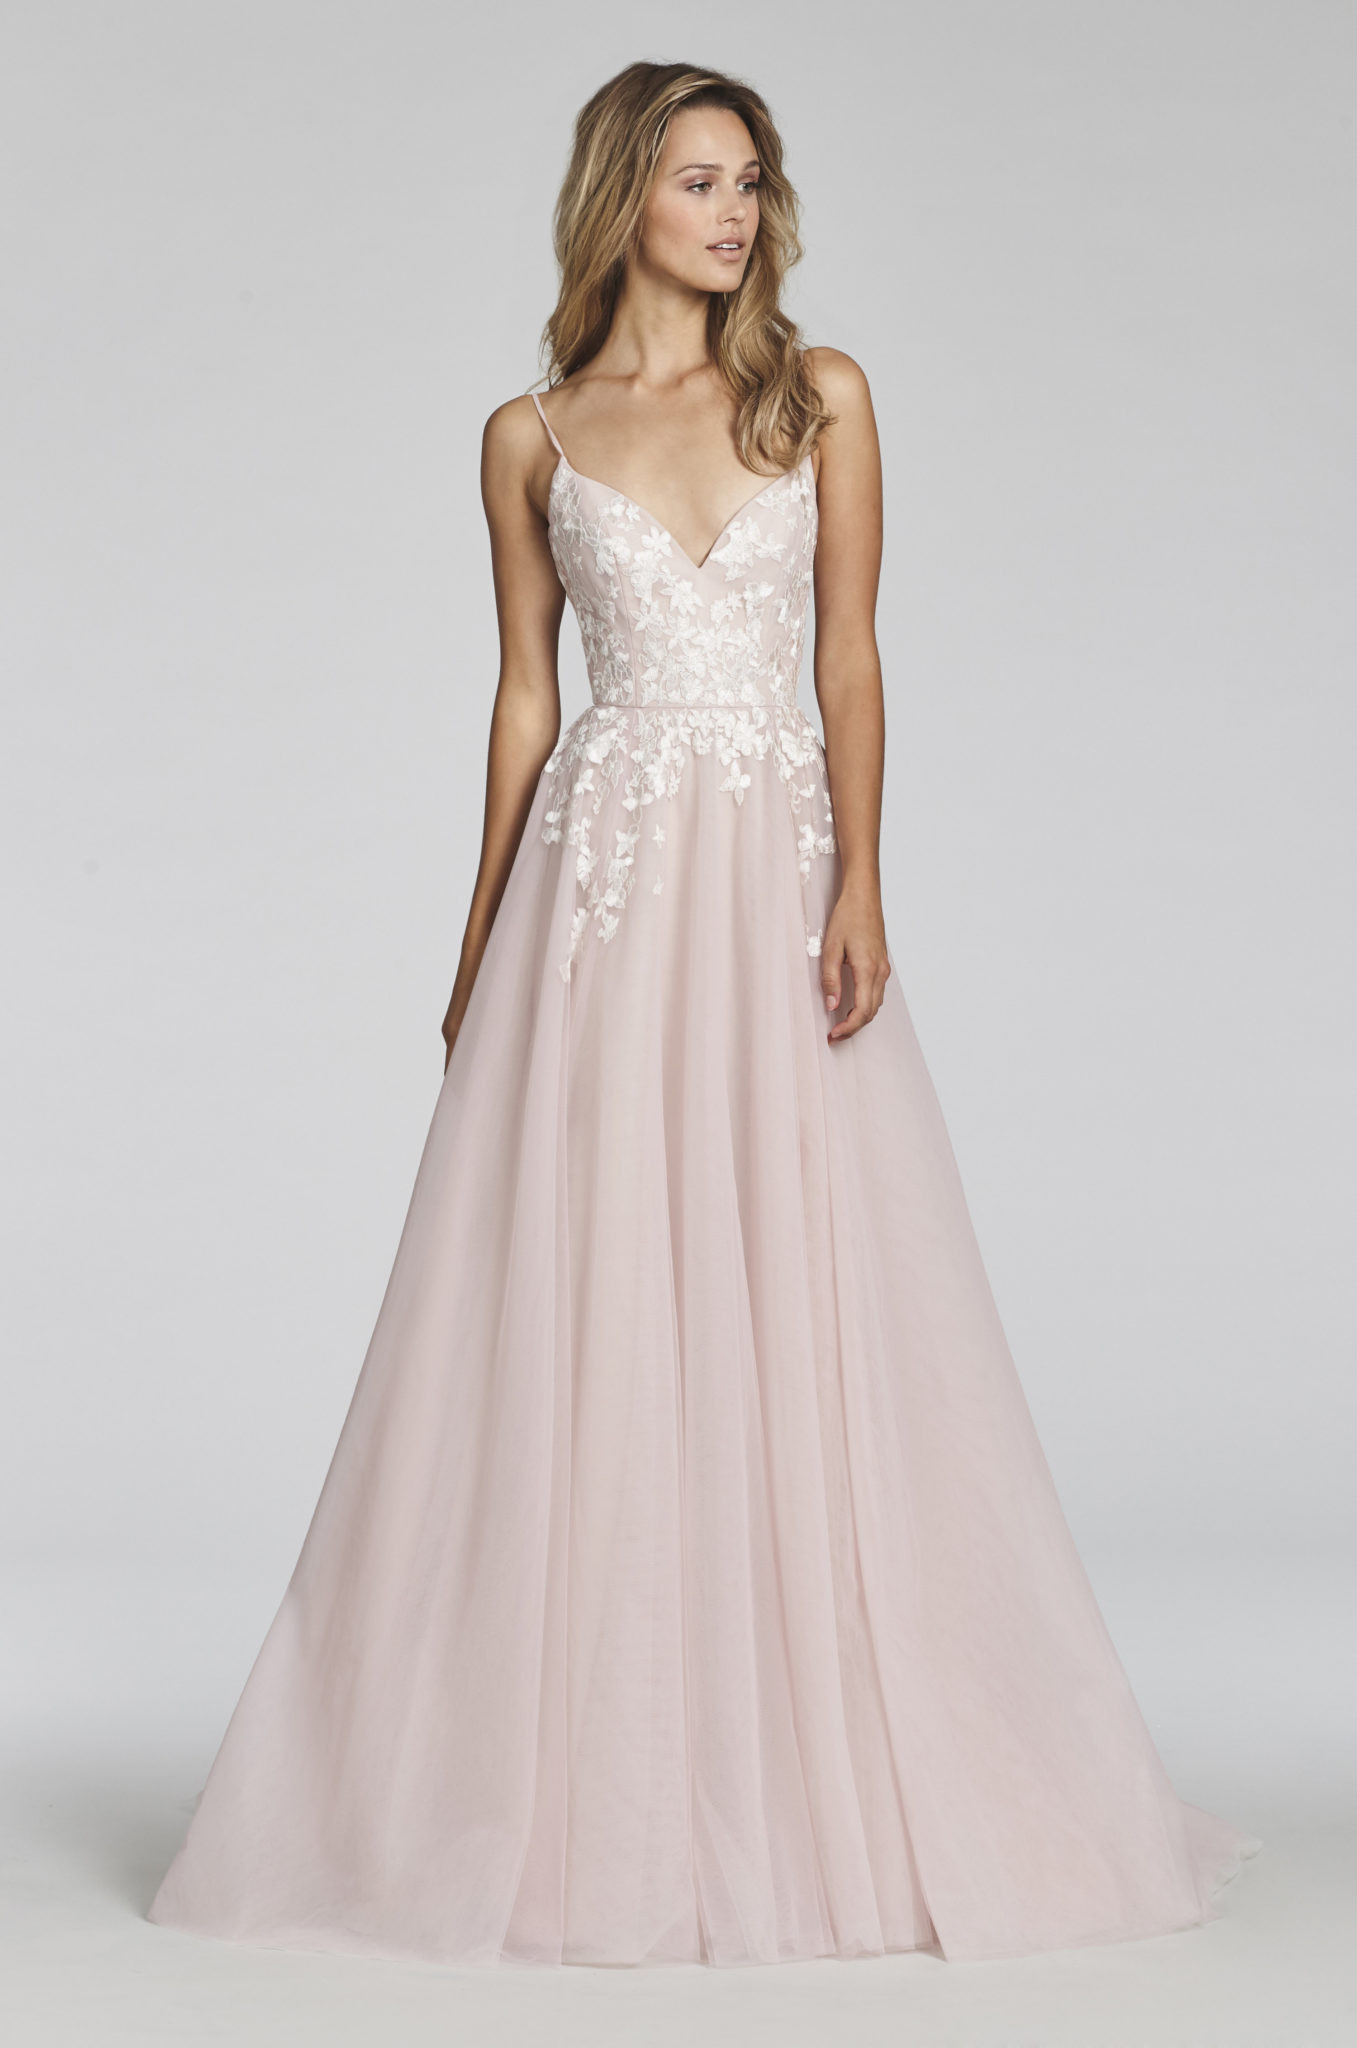 Blush Pink Wedding Gown
 Blushing Brides 10 Gowns That Will Make You Want a Blush